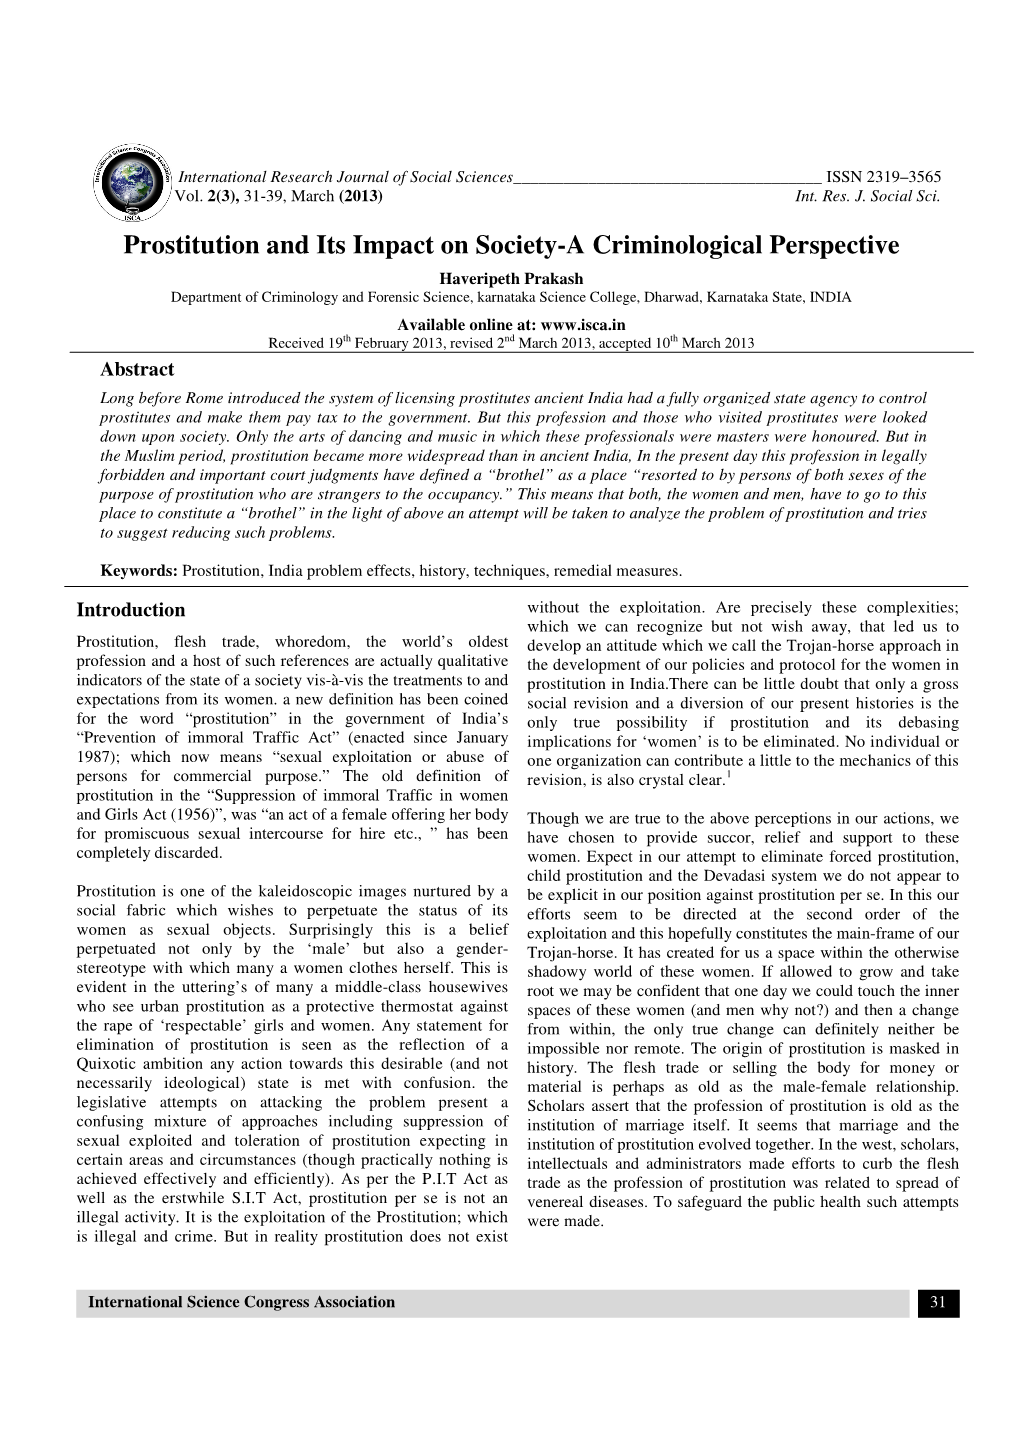 Prostitution and Its Impact on Society-A Criminological Perspective